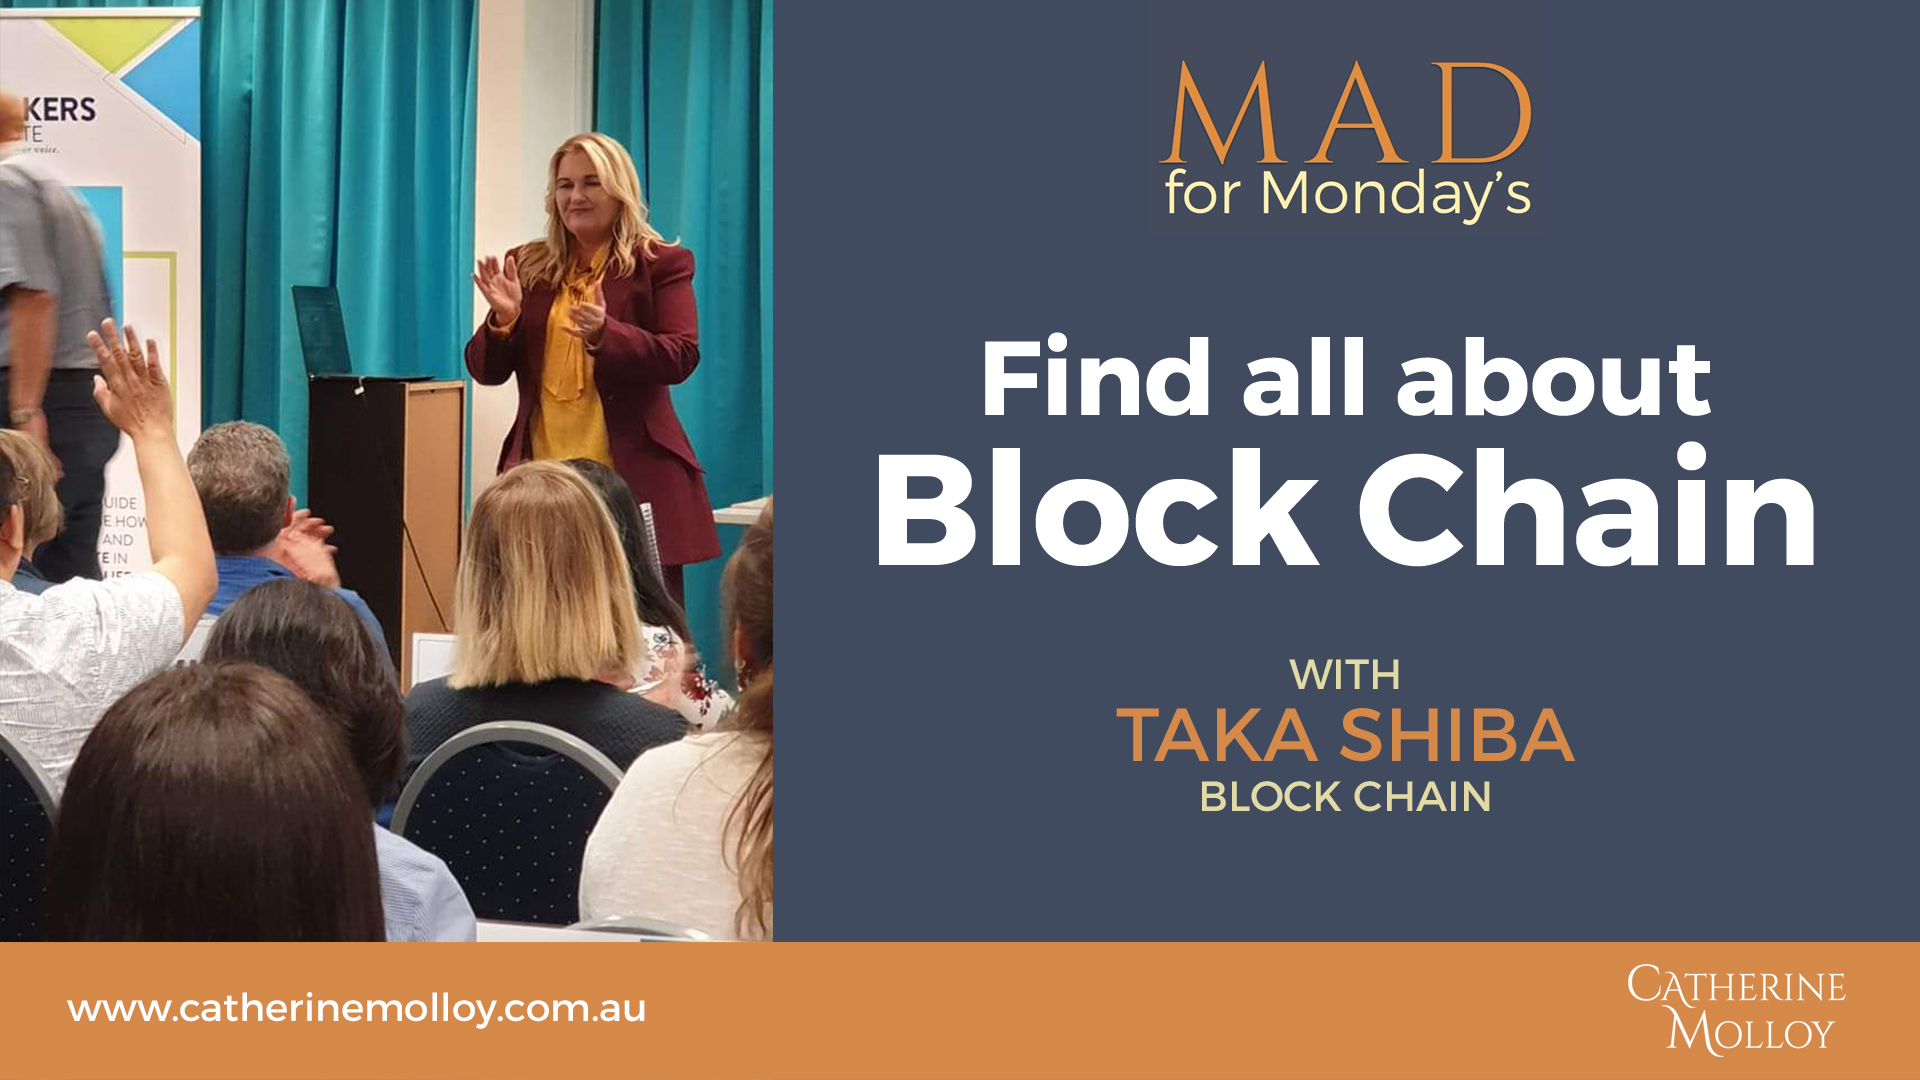 MAD for Monday’s – Find all about Block Chain